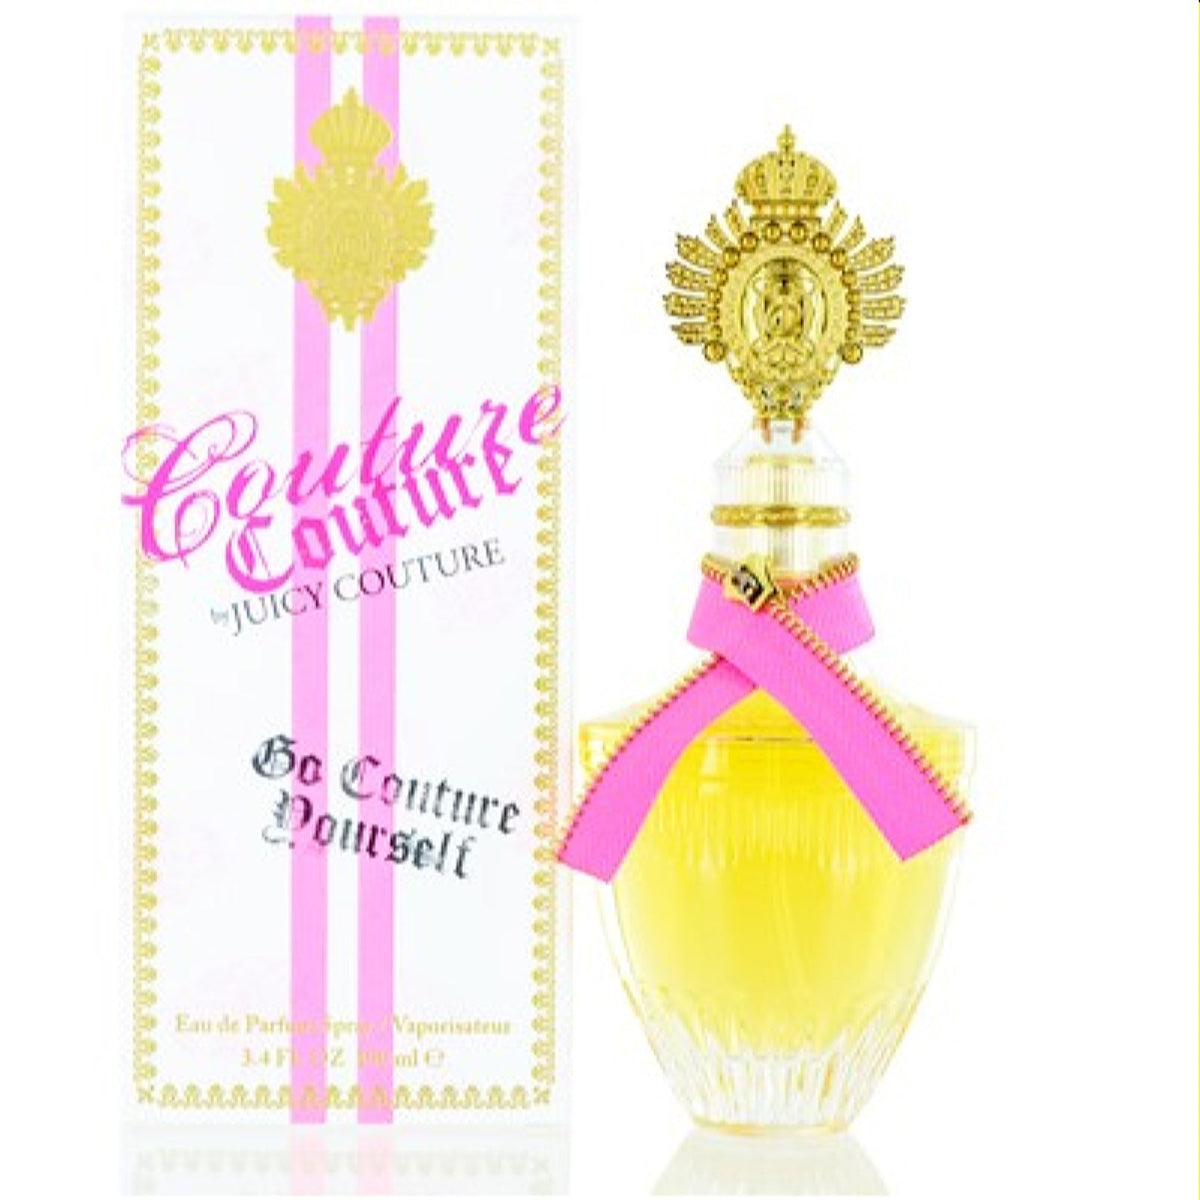 Couture Couture Juicy Couture Edp Spray 3.4 Oz For Women JY3F40003